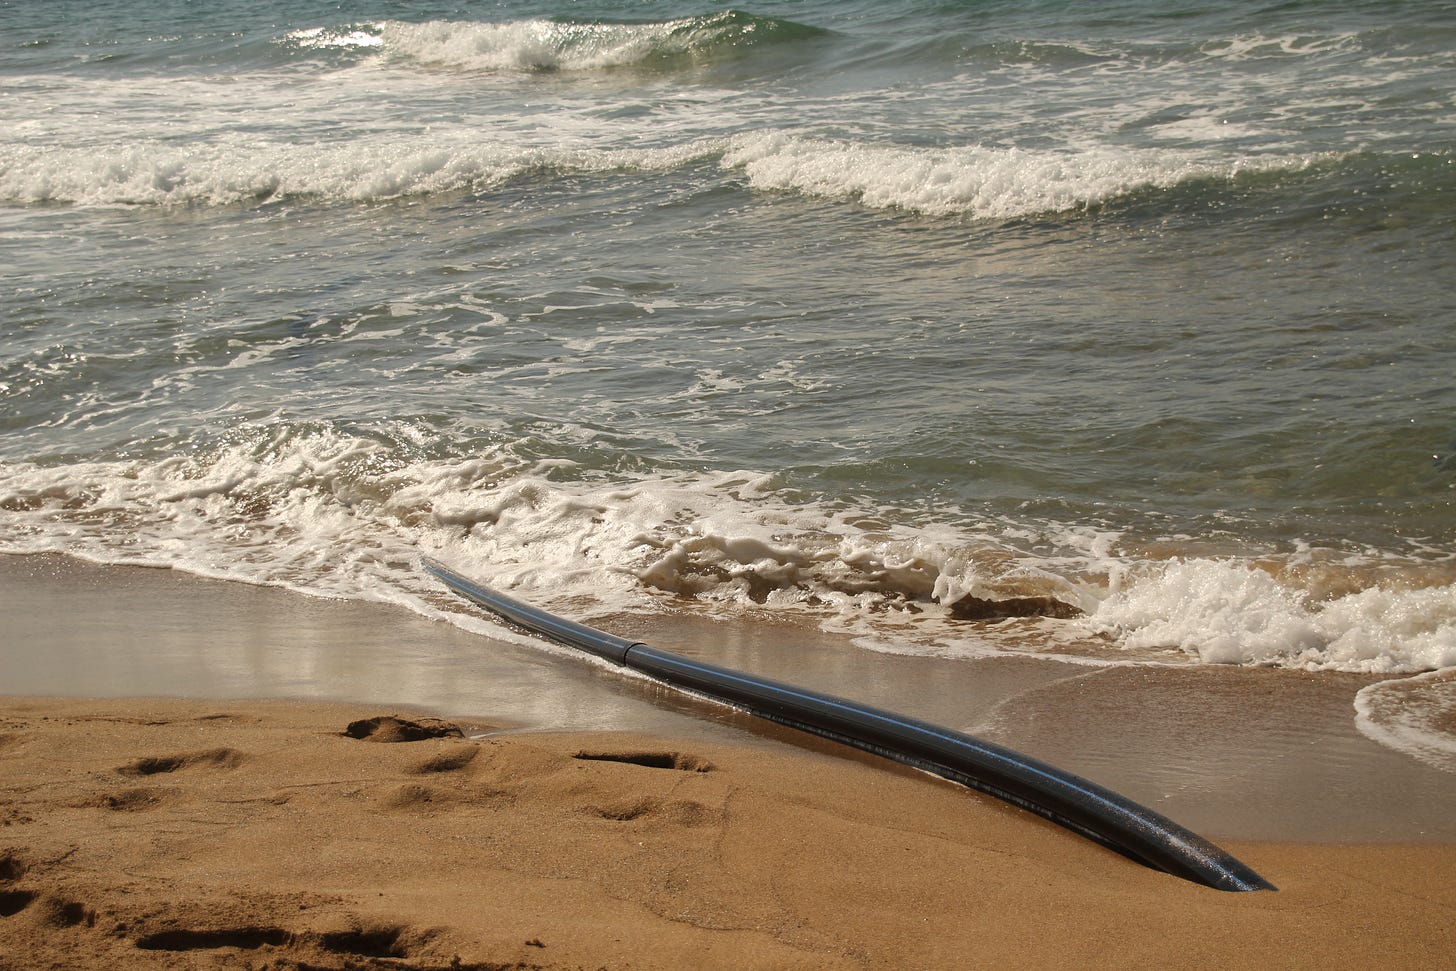 A black cable on a beach disappears into the ocean surf.